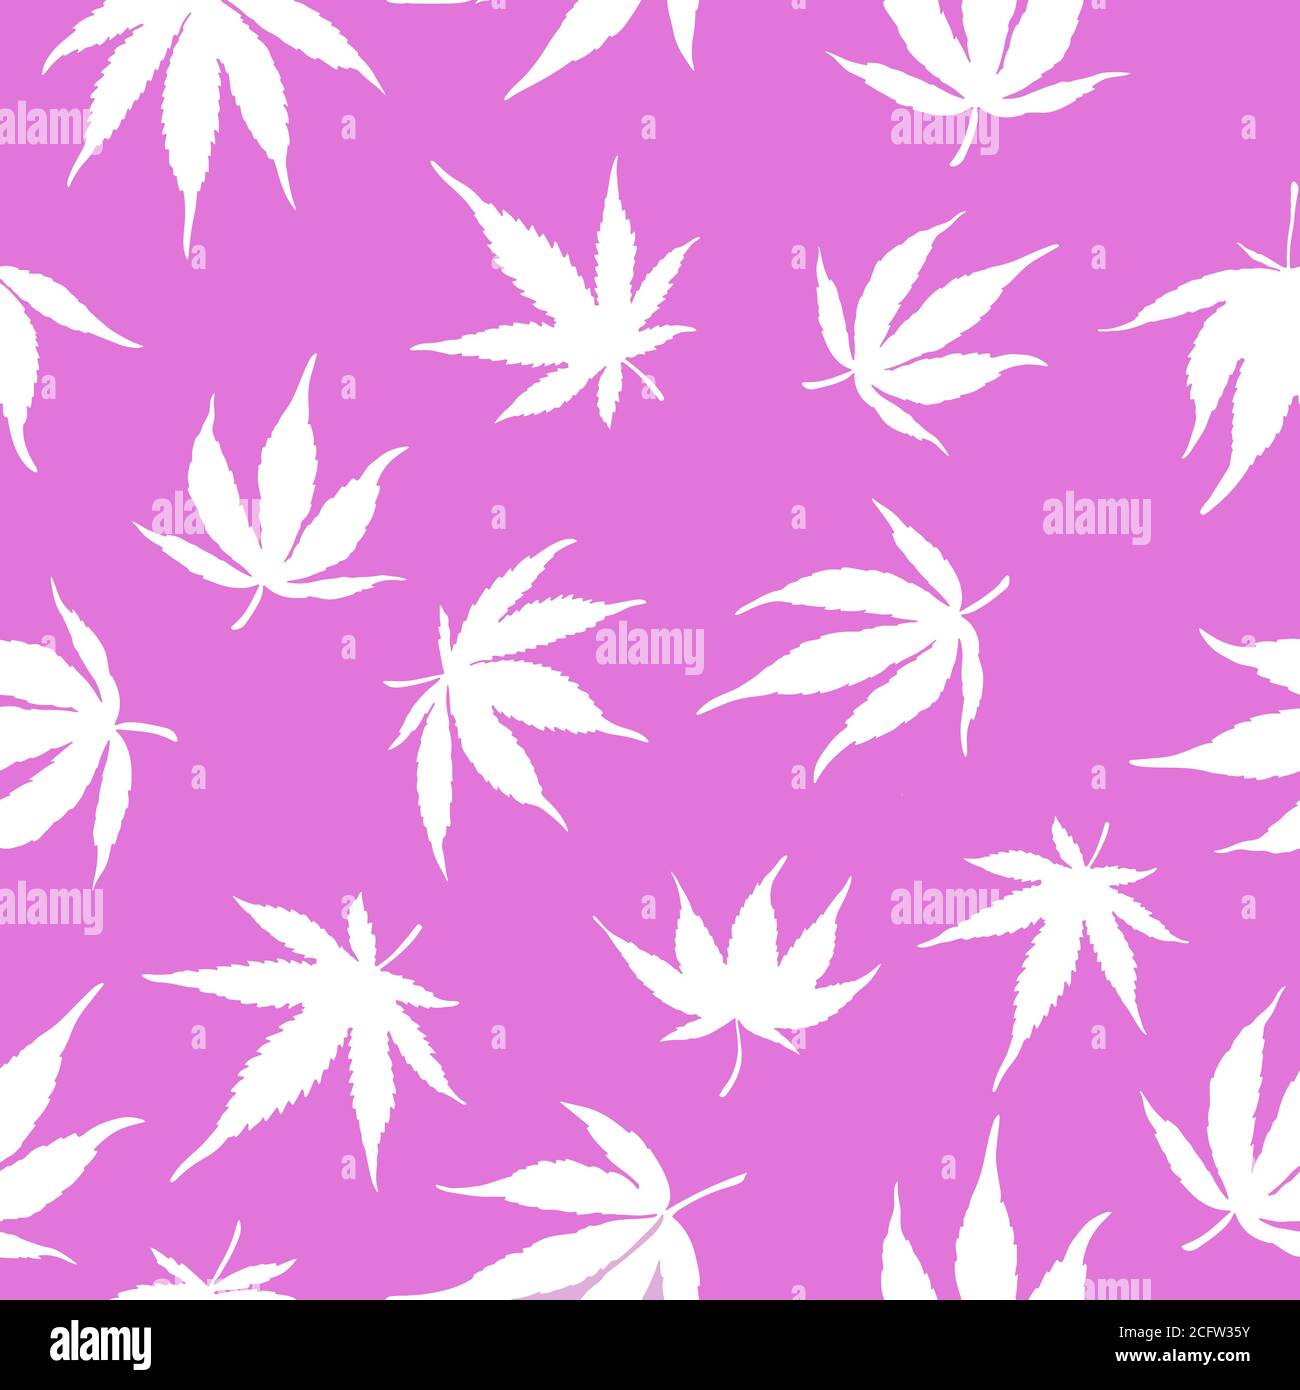 Weed Aesthetic Wallpapers  Top Free Weed Aesthetic Backgrounds   WallpaperAccess